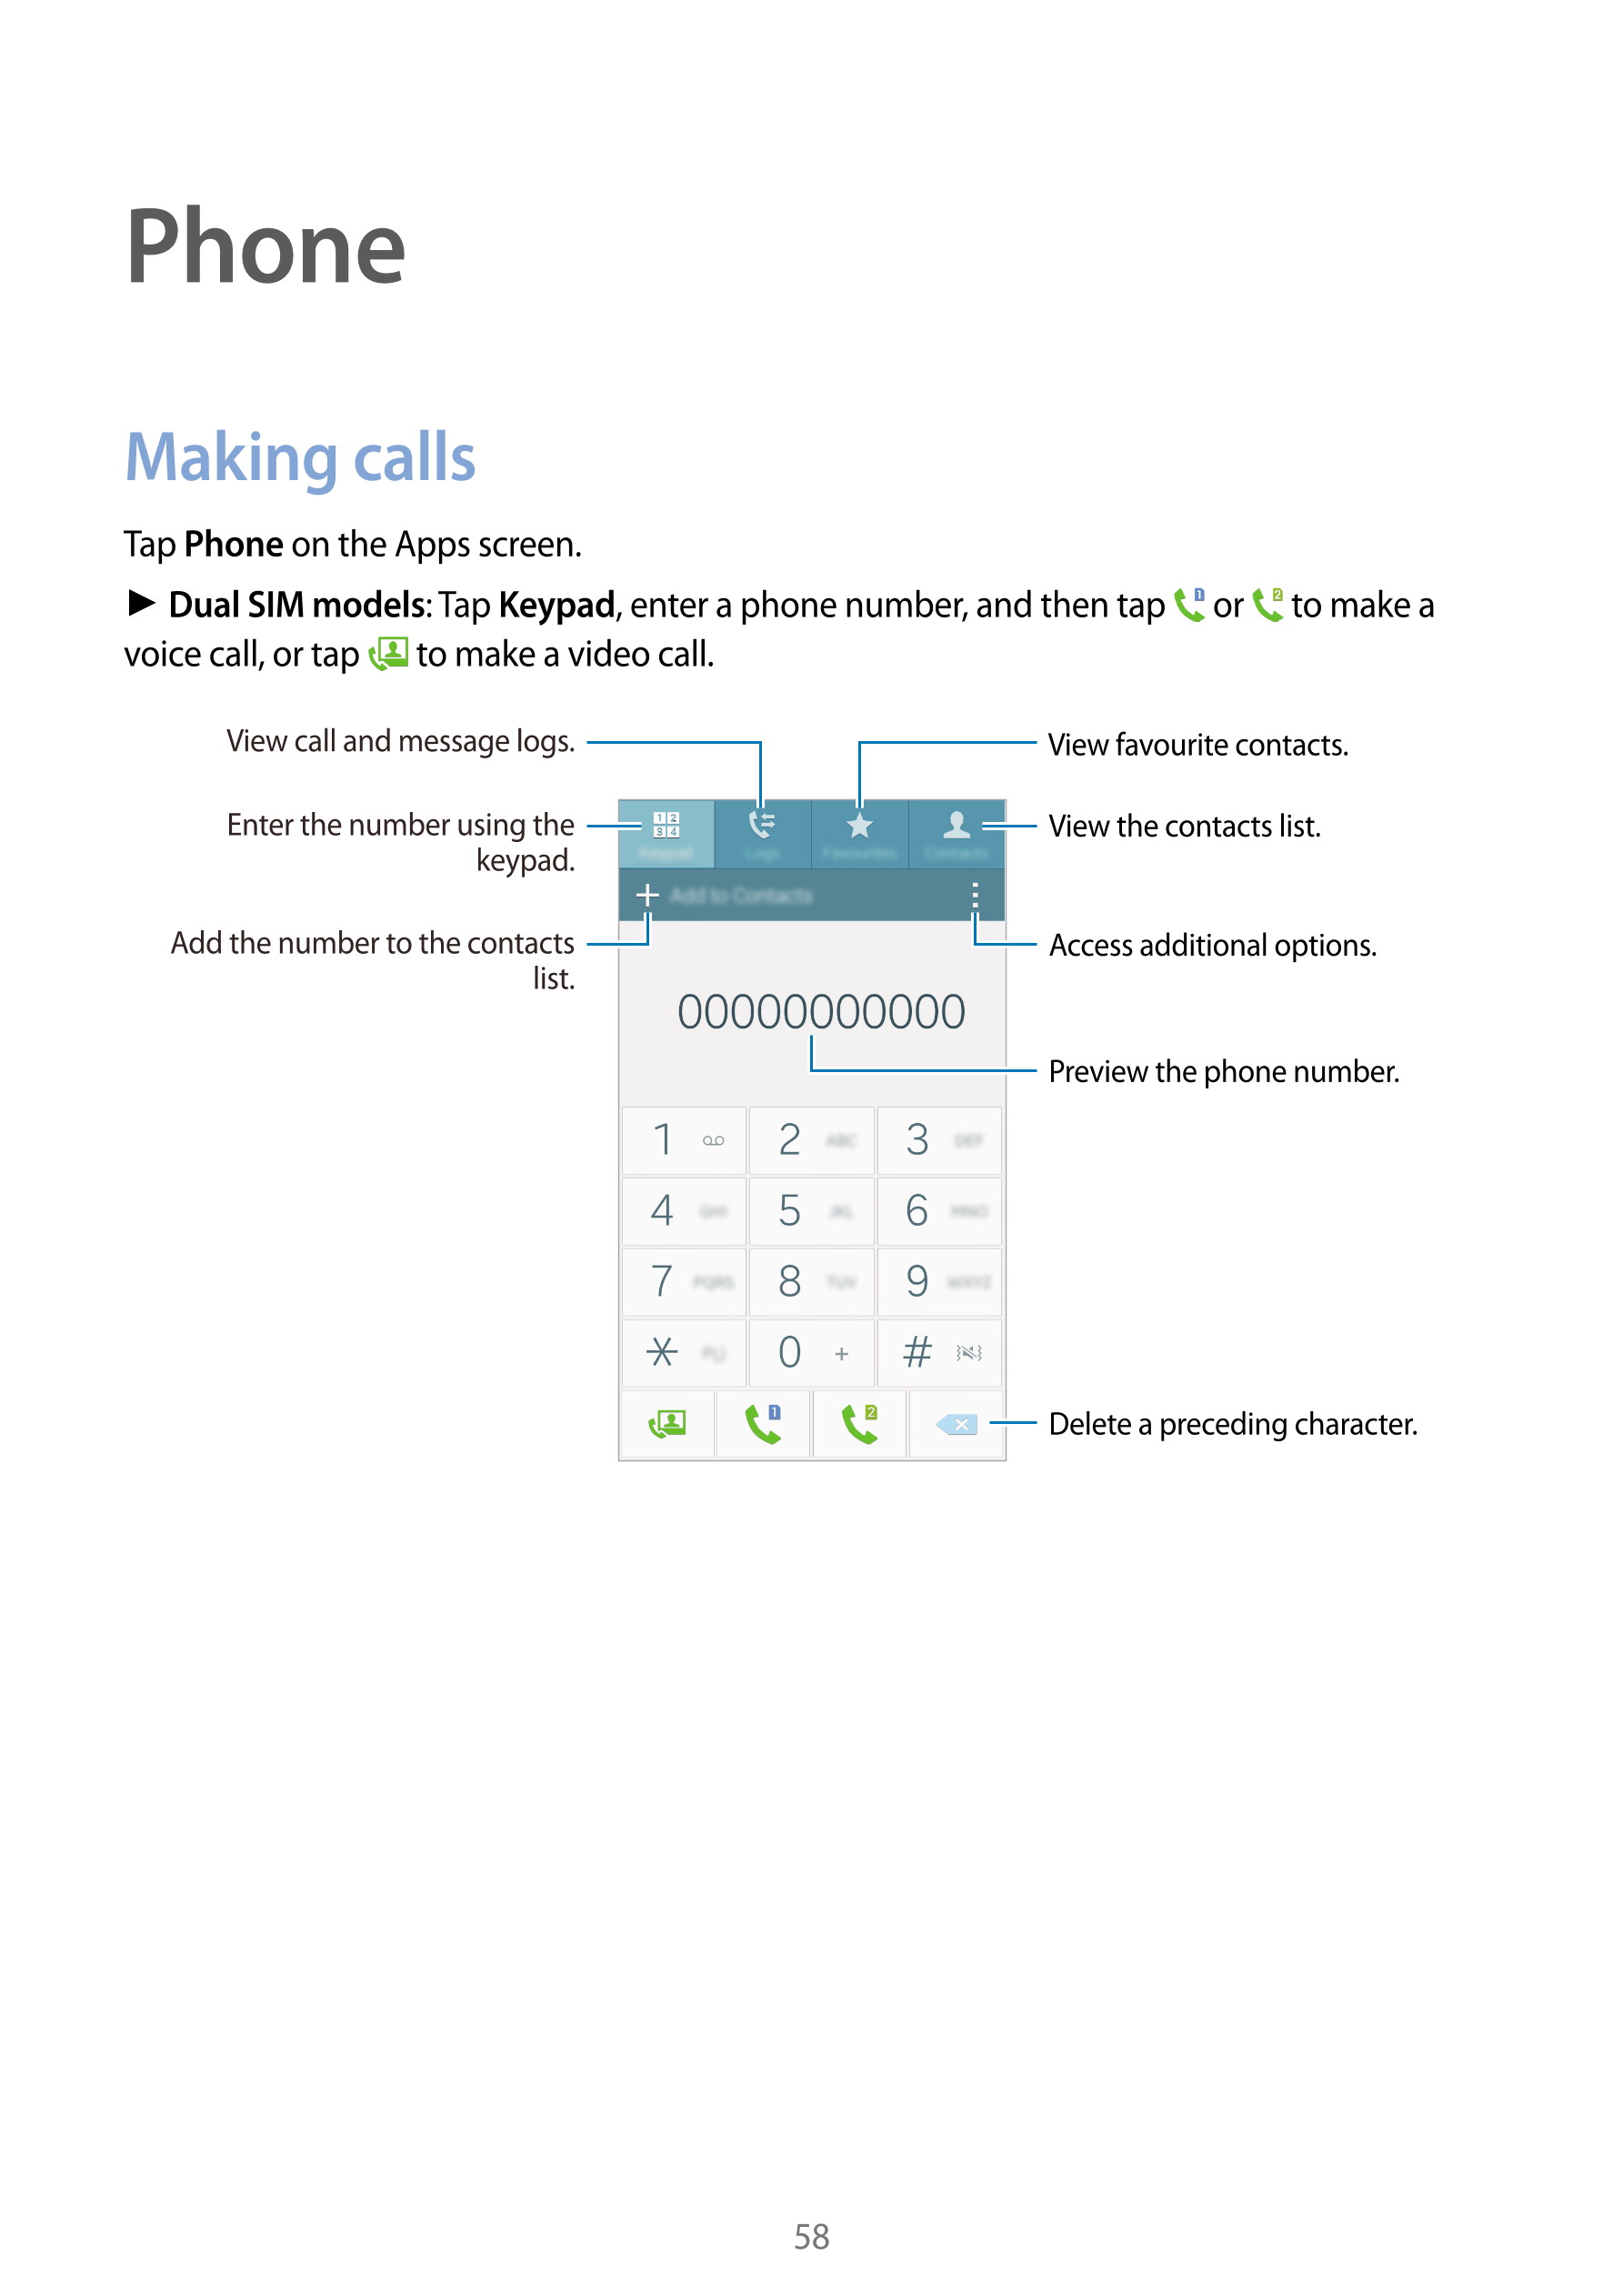 Phone
Making calls
Tap  Phone on the Apps screen.
►  Dual SIM models: Tap  Keypad, enter a phone number, and then tap   or   to 